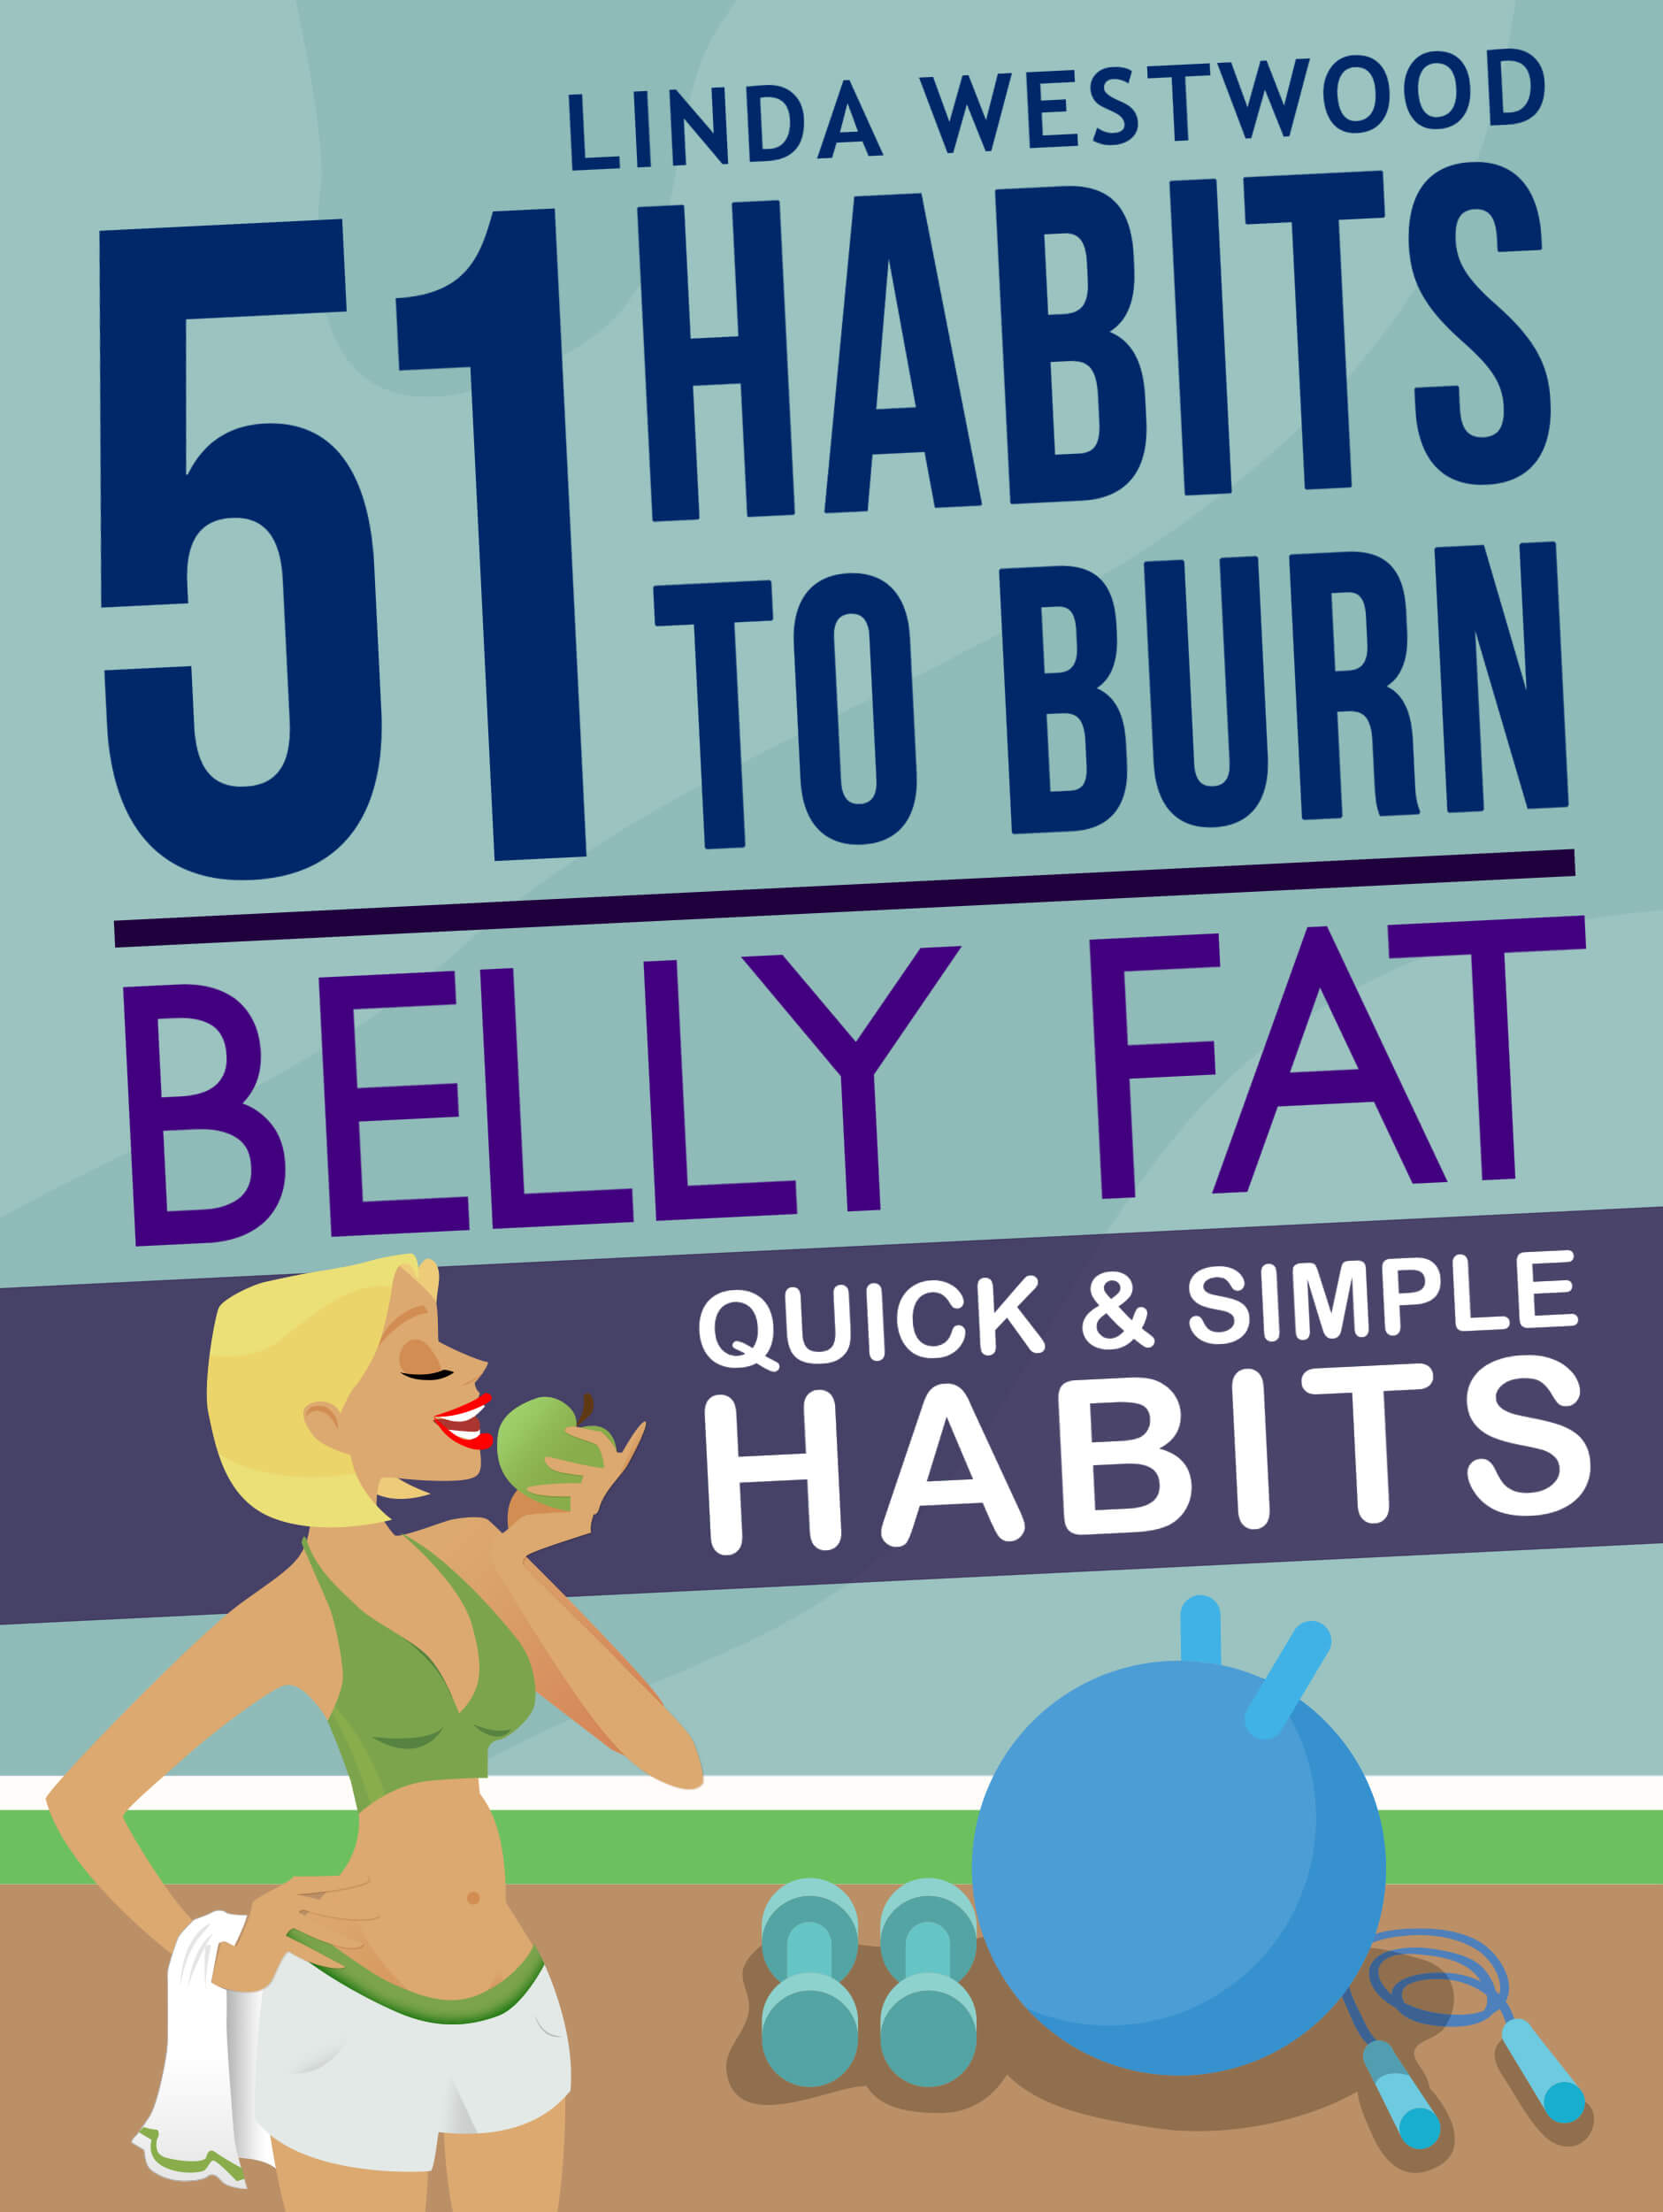 FREE: Belly Fat (3rd Edition): 51 Quick & Simple Habits to Burn Belly Fat & Tone Abs! by Linda Westwood